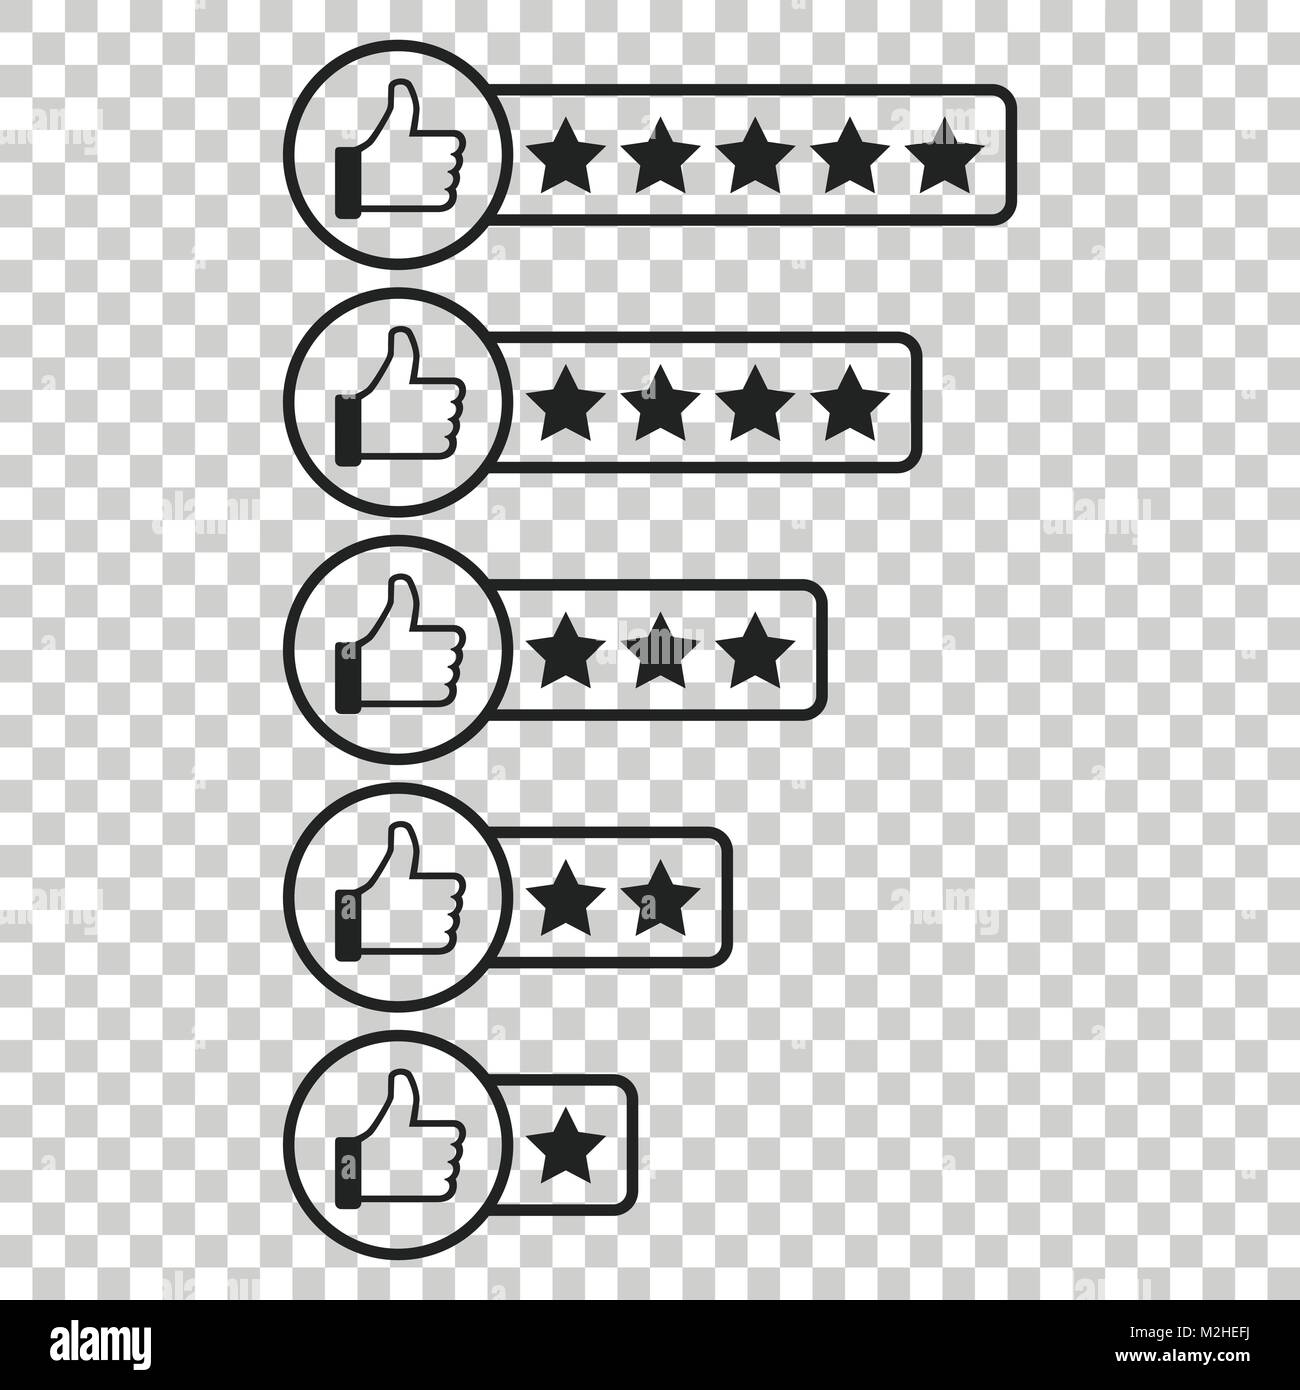 Customer review icon. Thumb up with stars rating vector illustration. Stock Vector